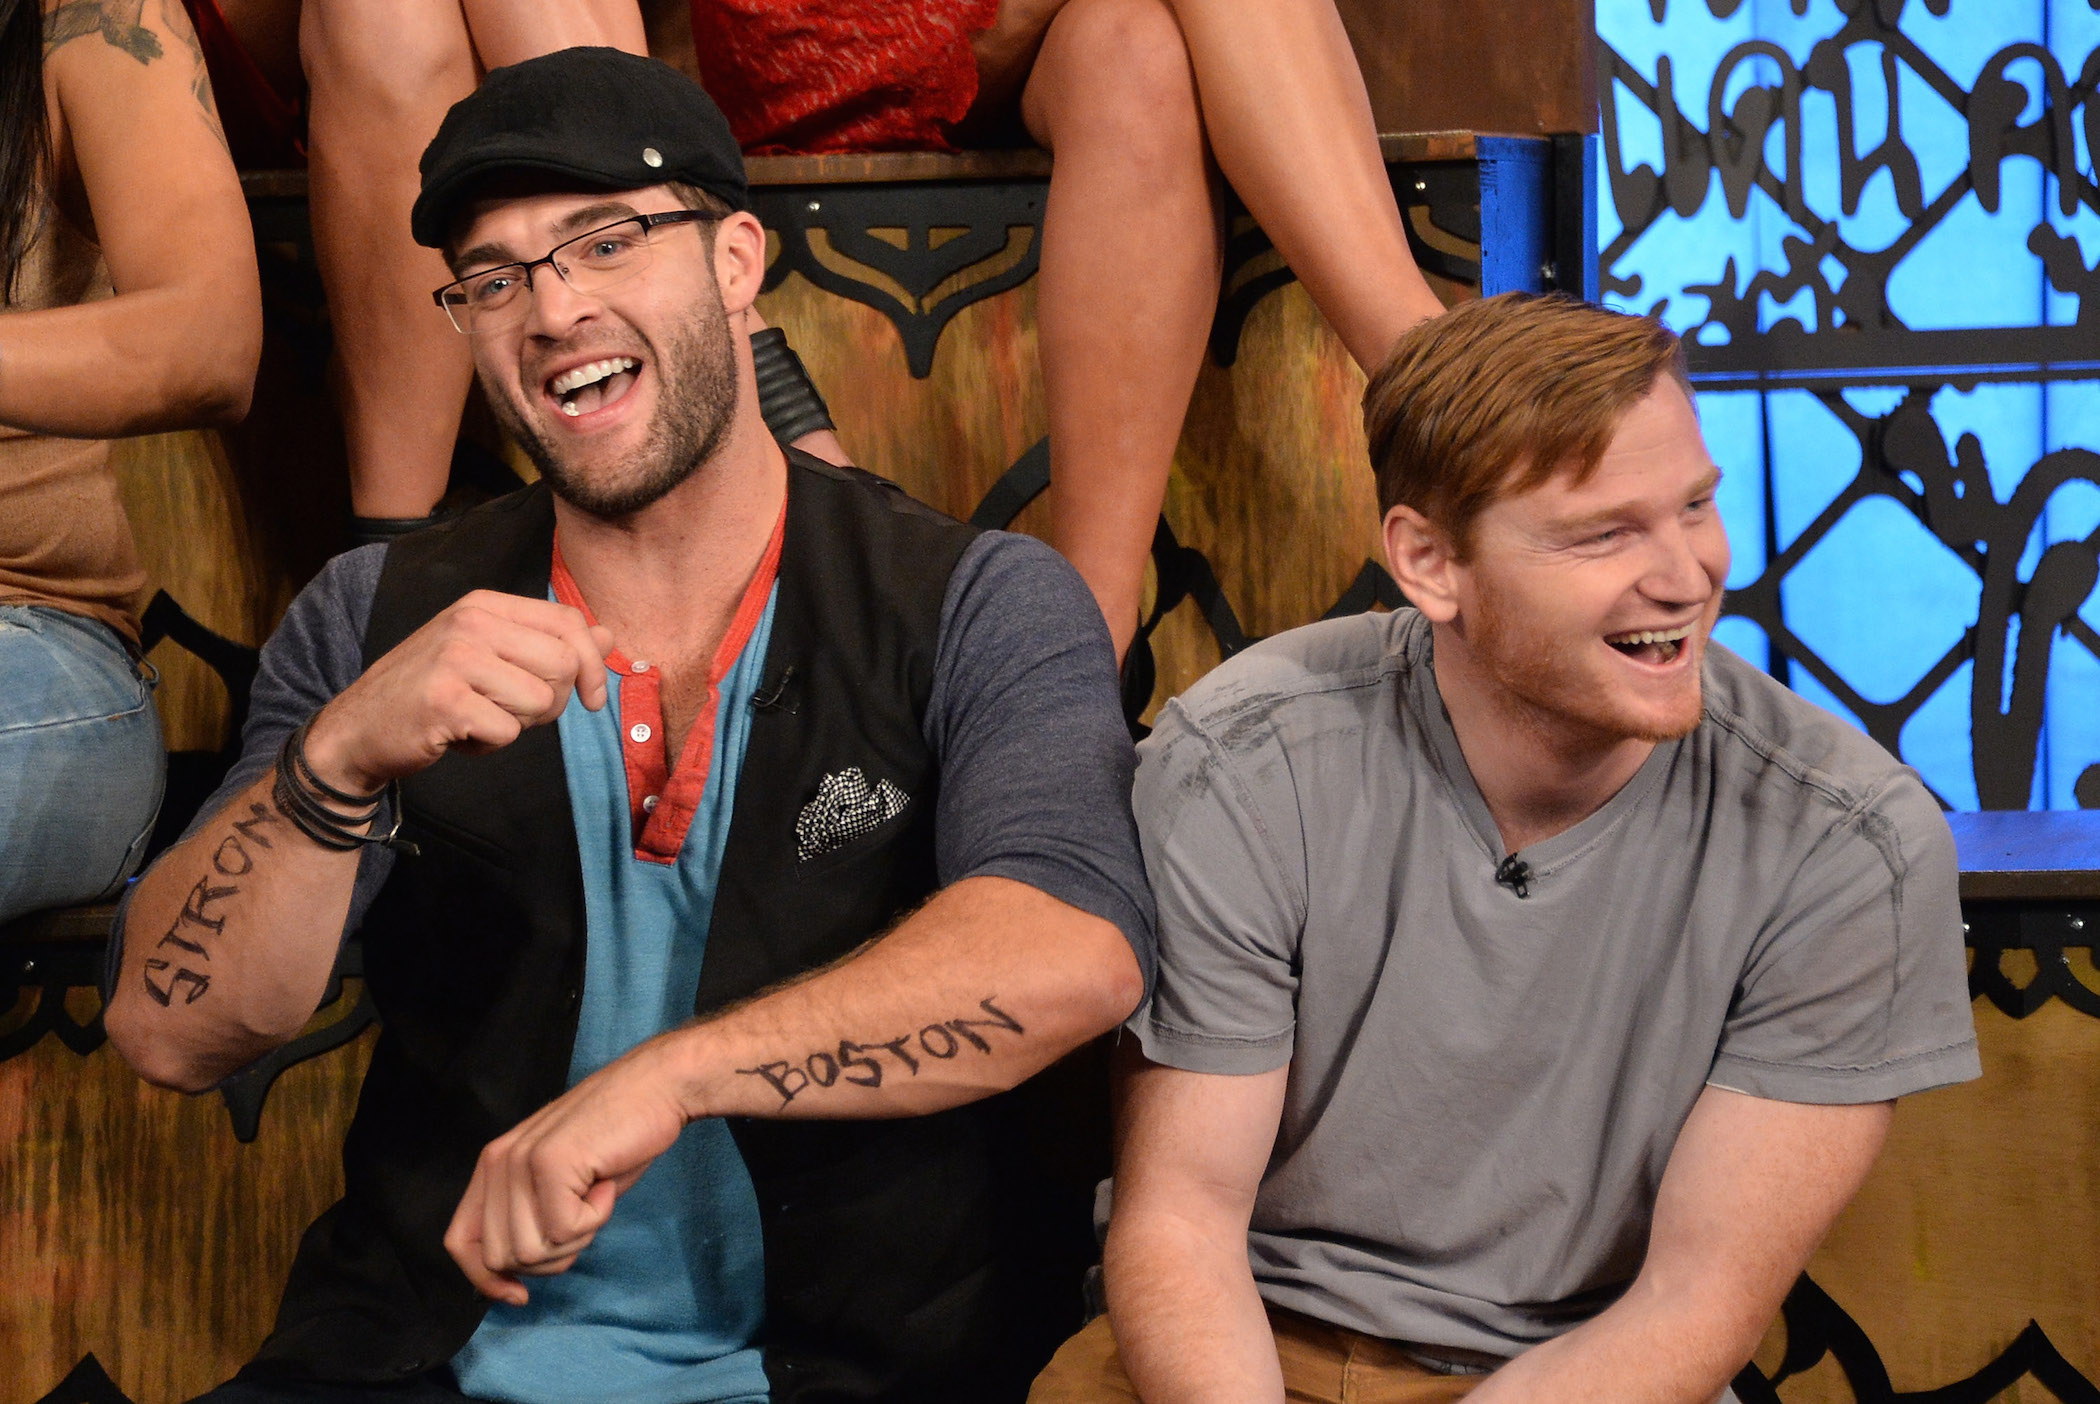 CT Tamburello from 'The Challenge' and Wes Bergmann sitting and laughing together MTV's 'The Challenge' reunion